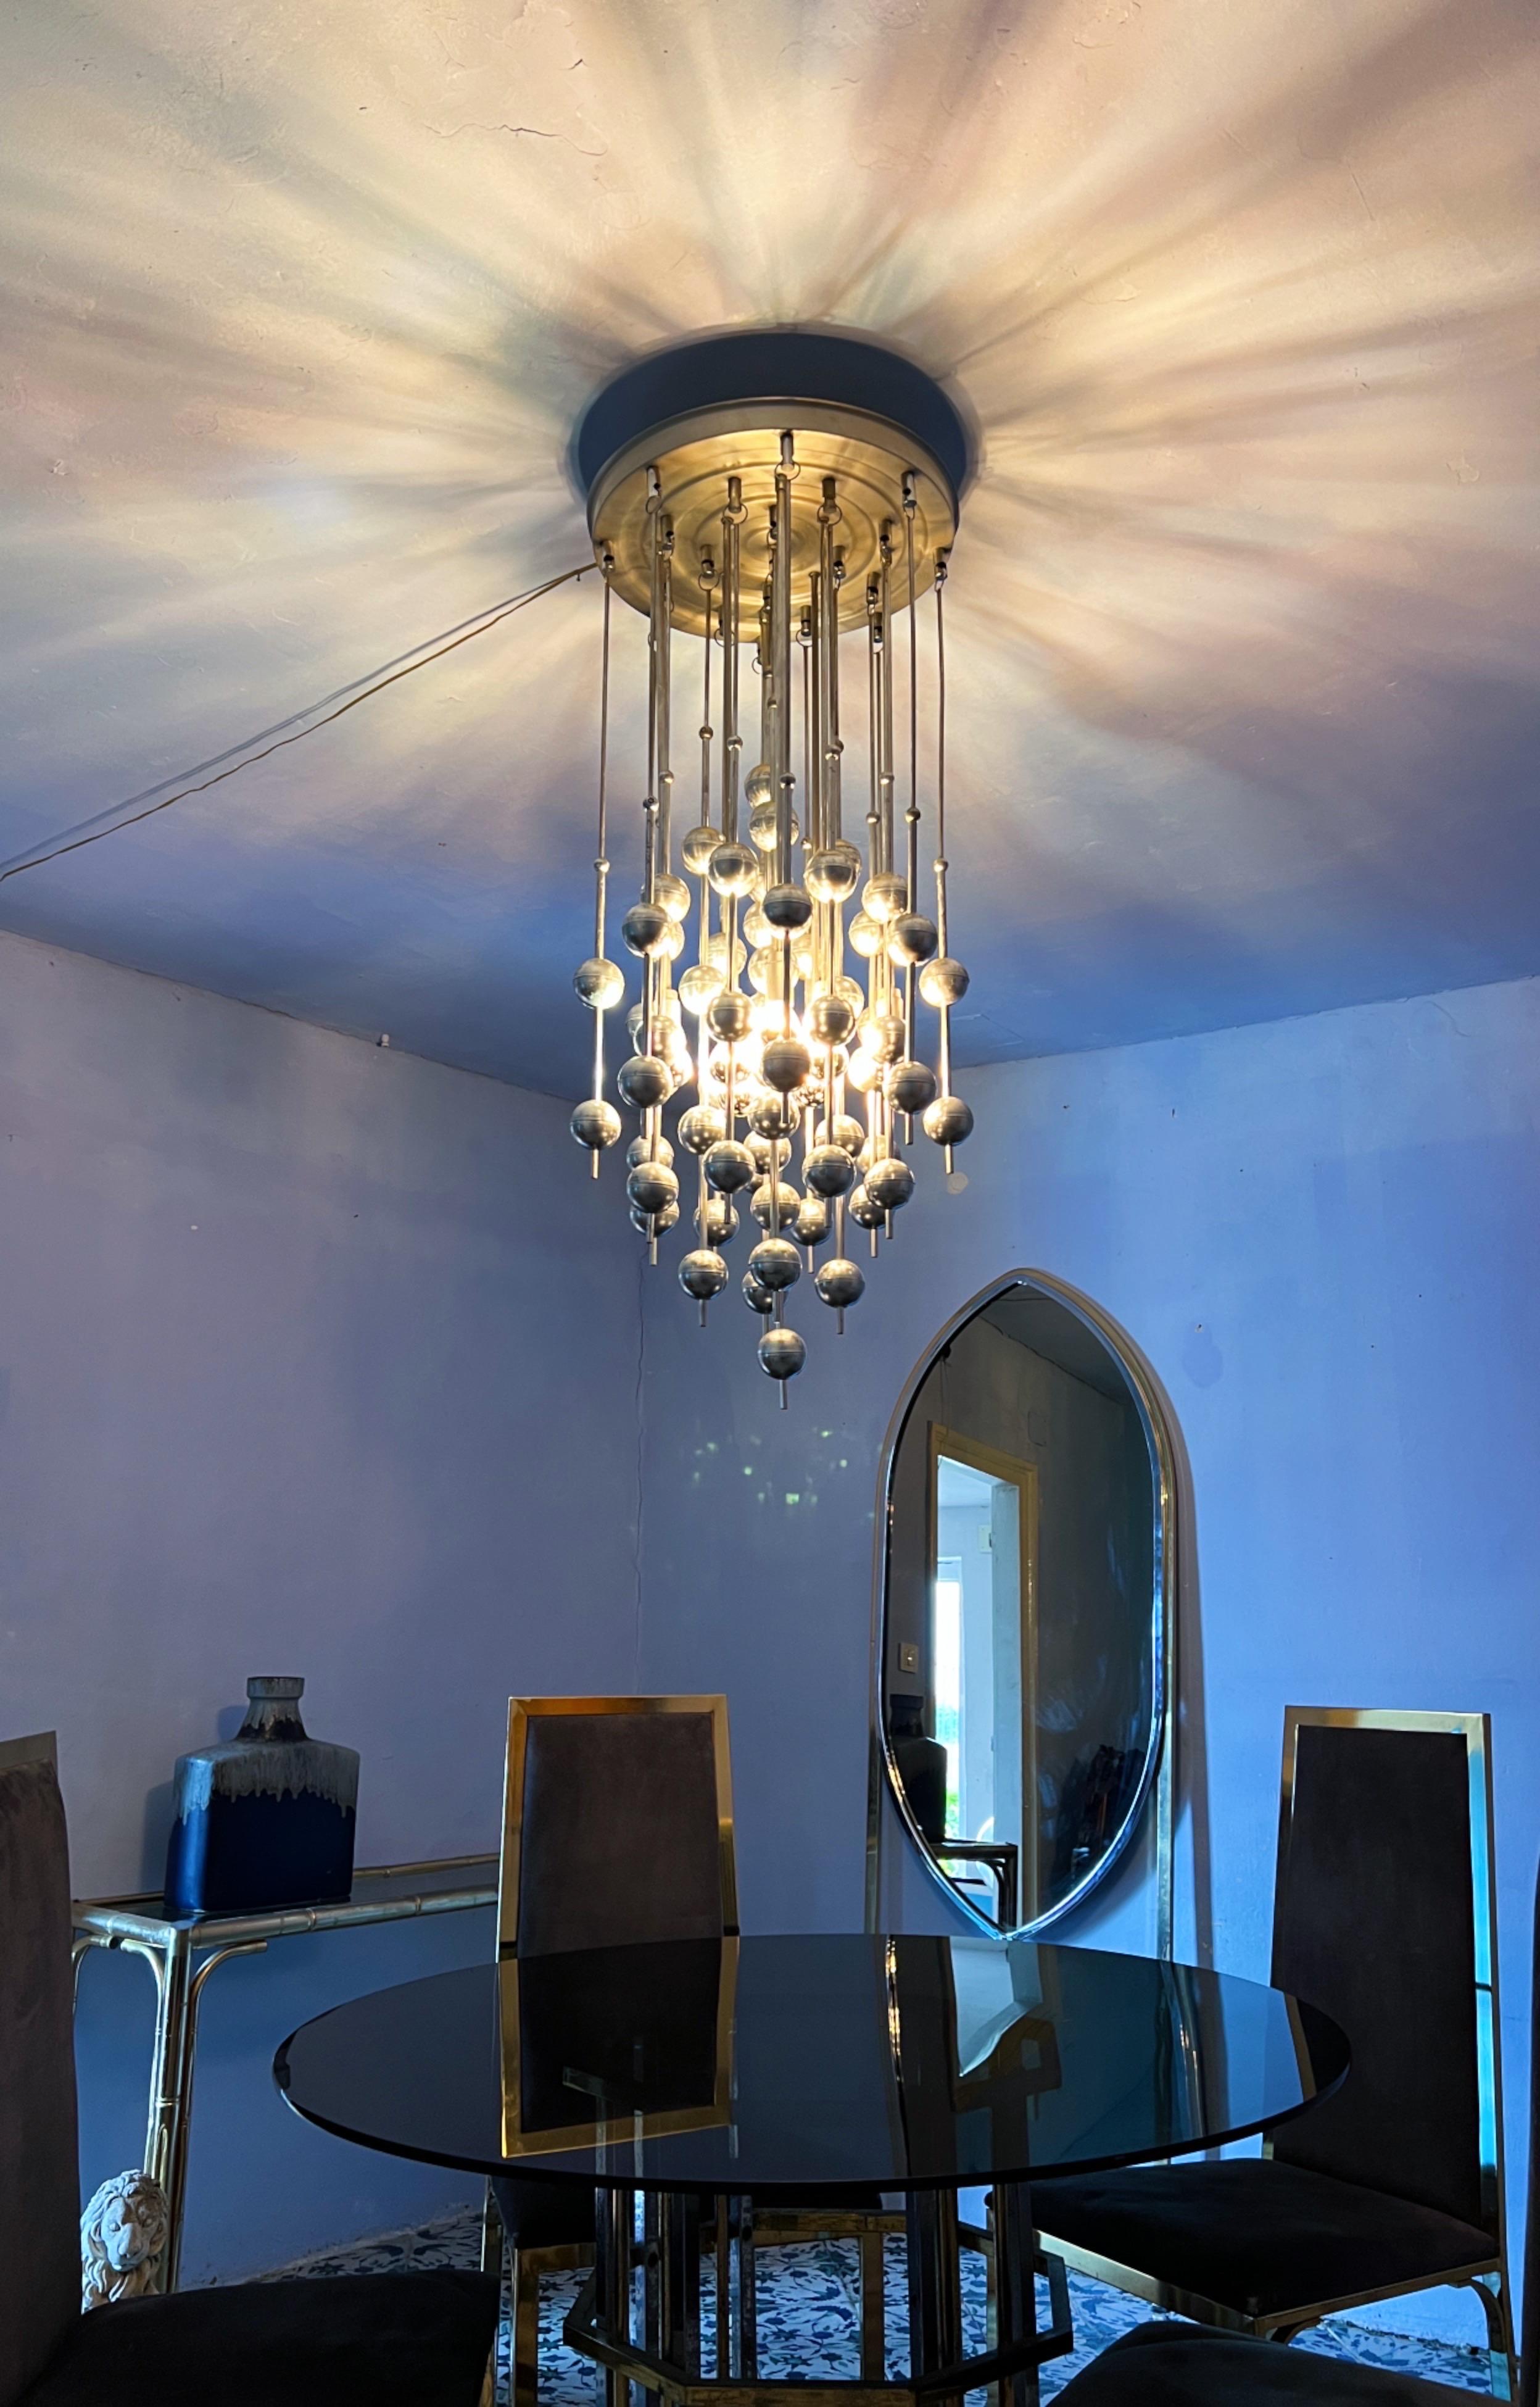 Let me introduce: the Amazing Chandelier, envisioned by the acclaimed Danish designer Verner Panton for J. Lüber during the illustrious 1970s era. Suspended with grace from steel rods, there are 21 chromed straws adorned with metal balls. With its